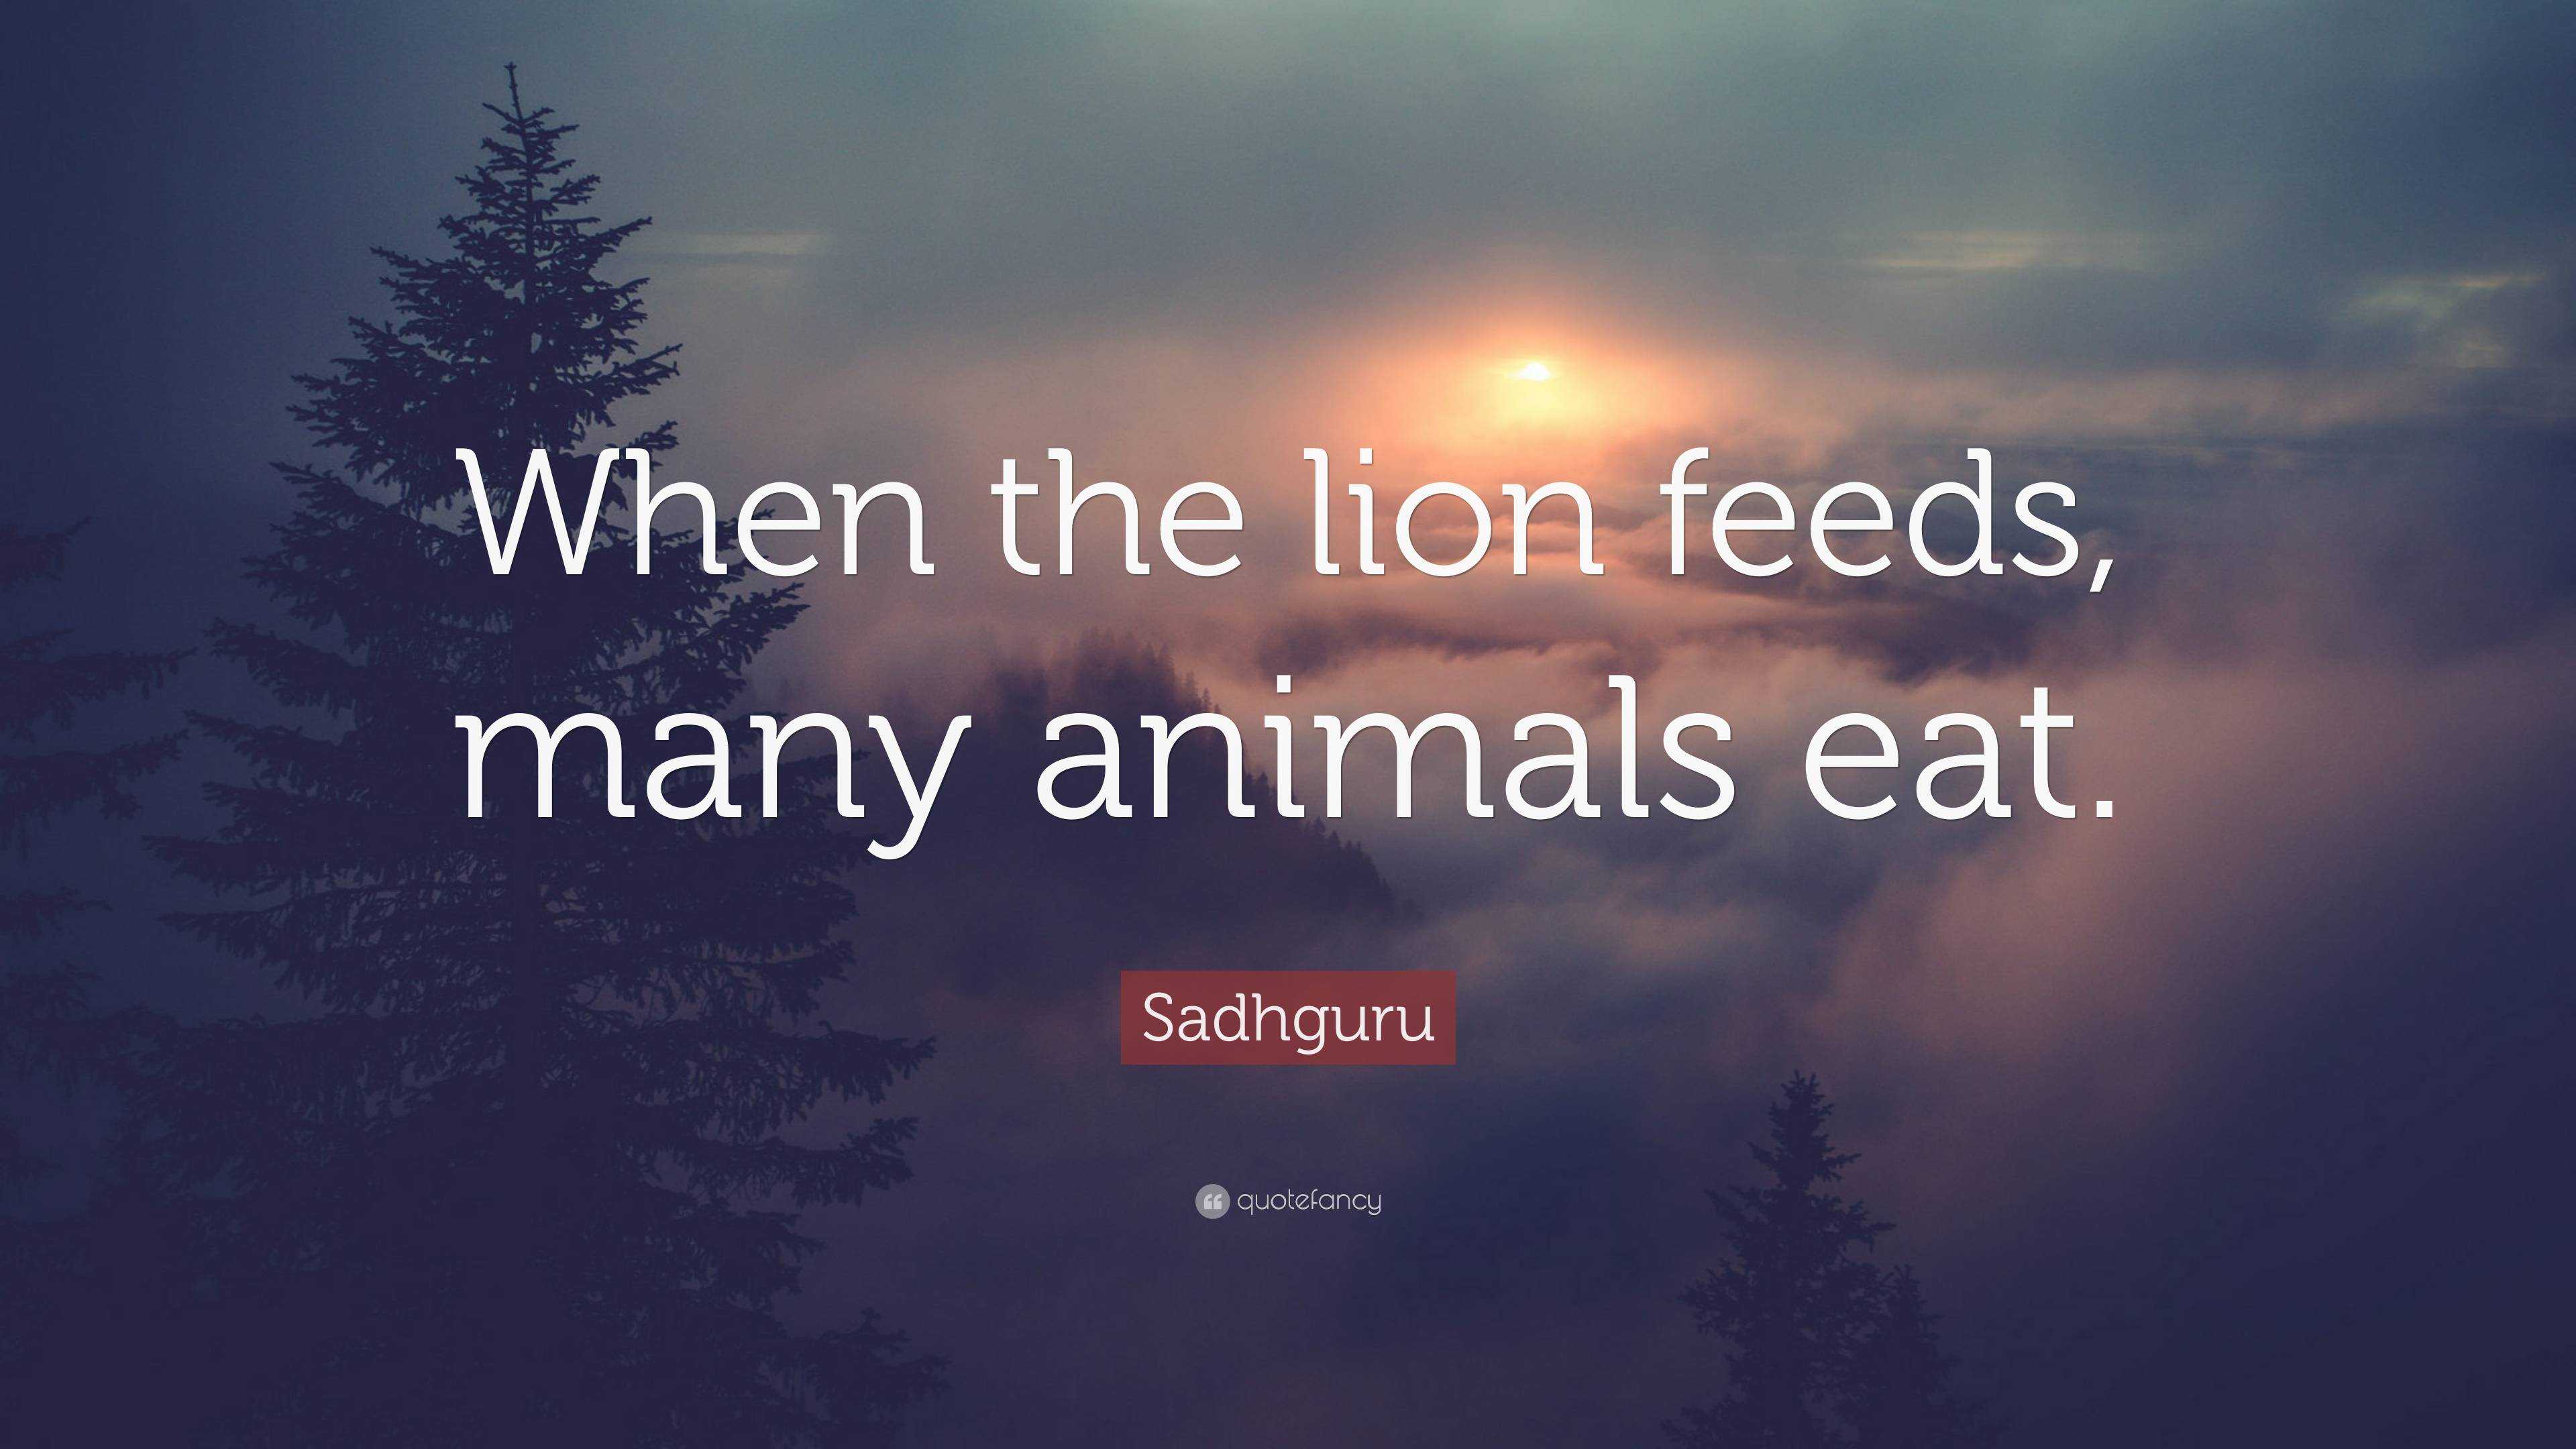 Sadhguru Quote: “When the lion feeds, many animals eat.”